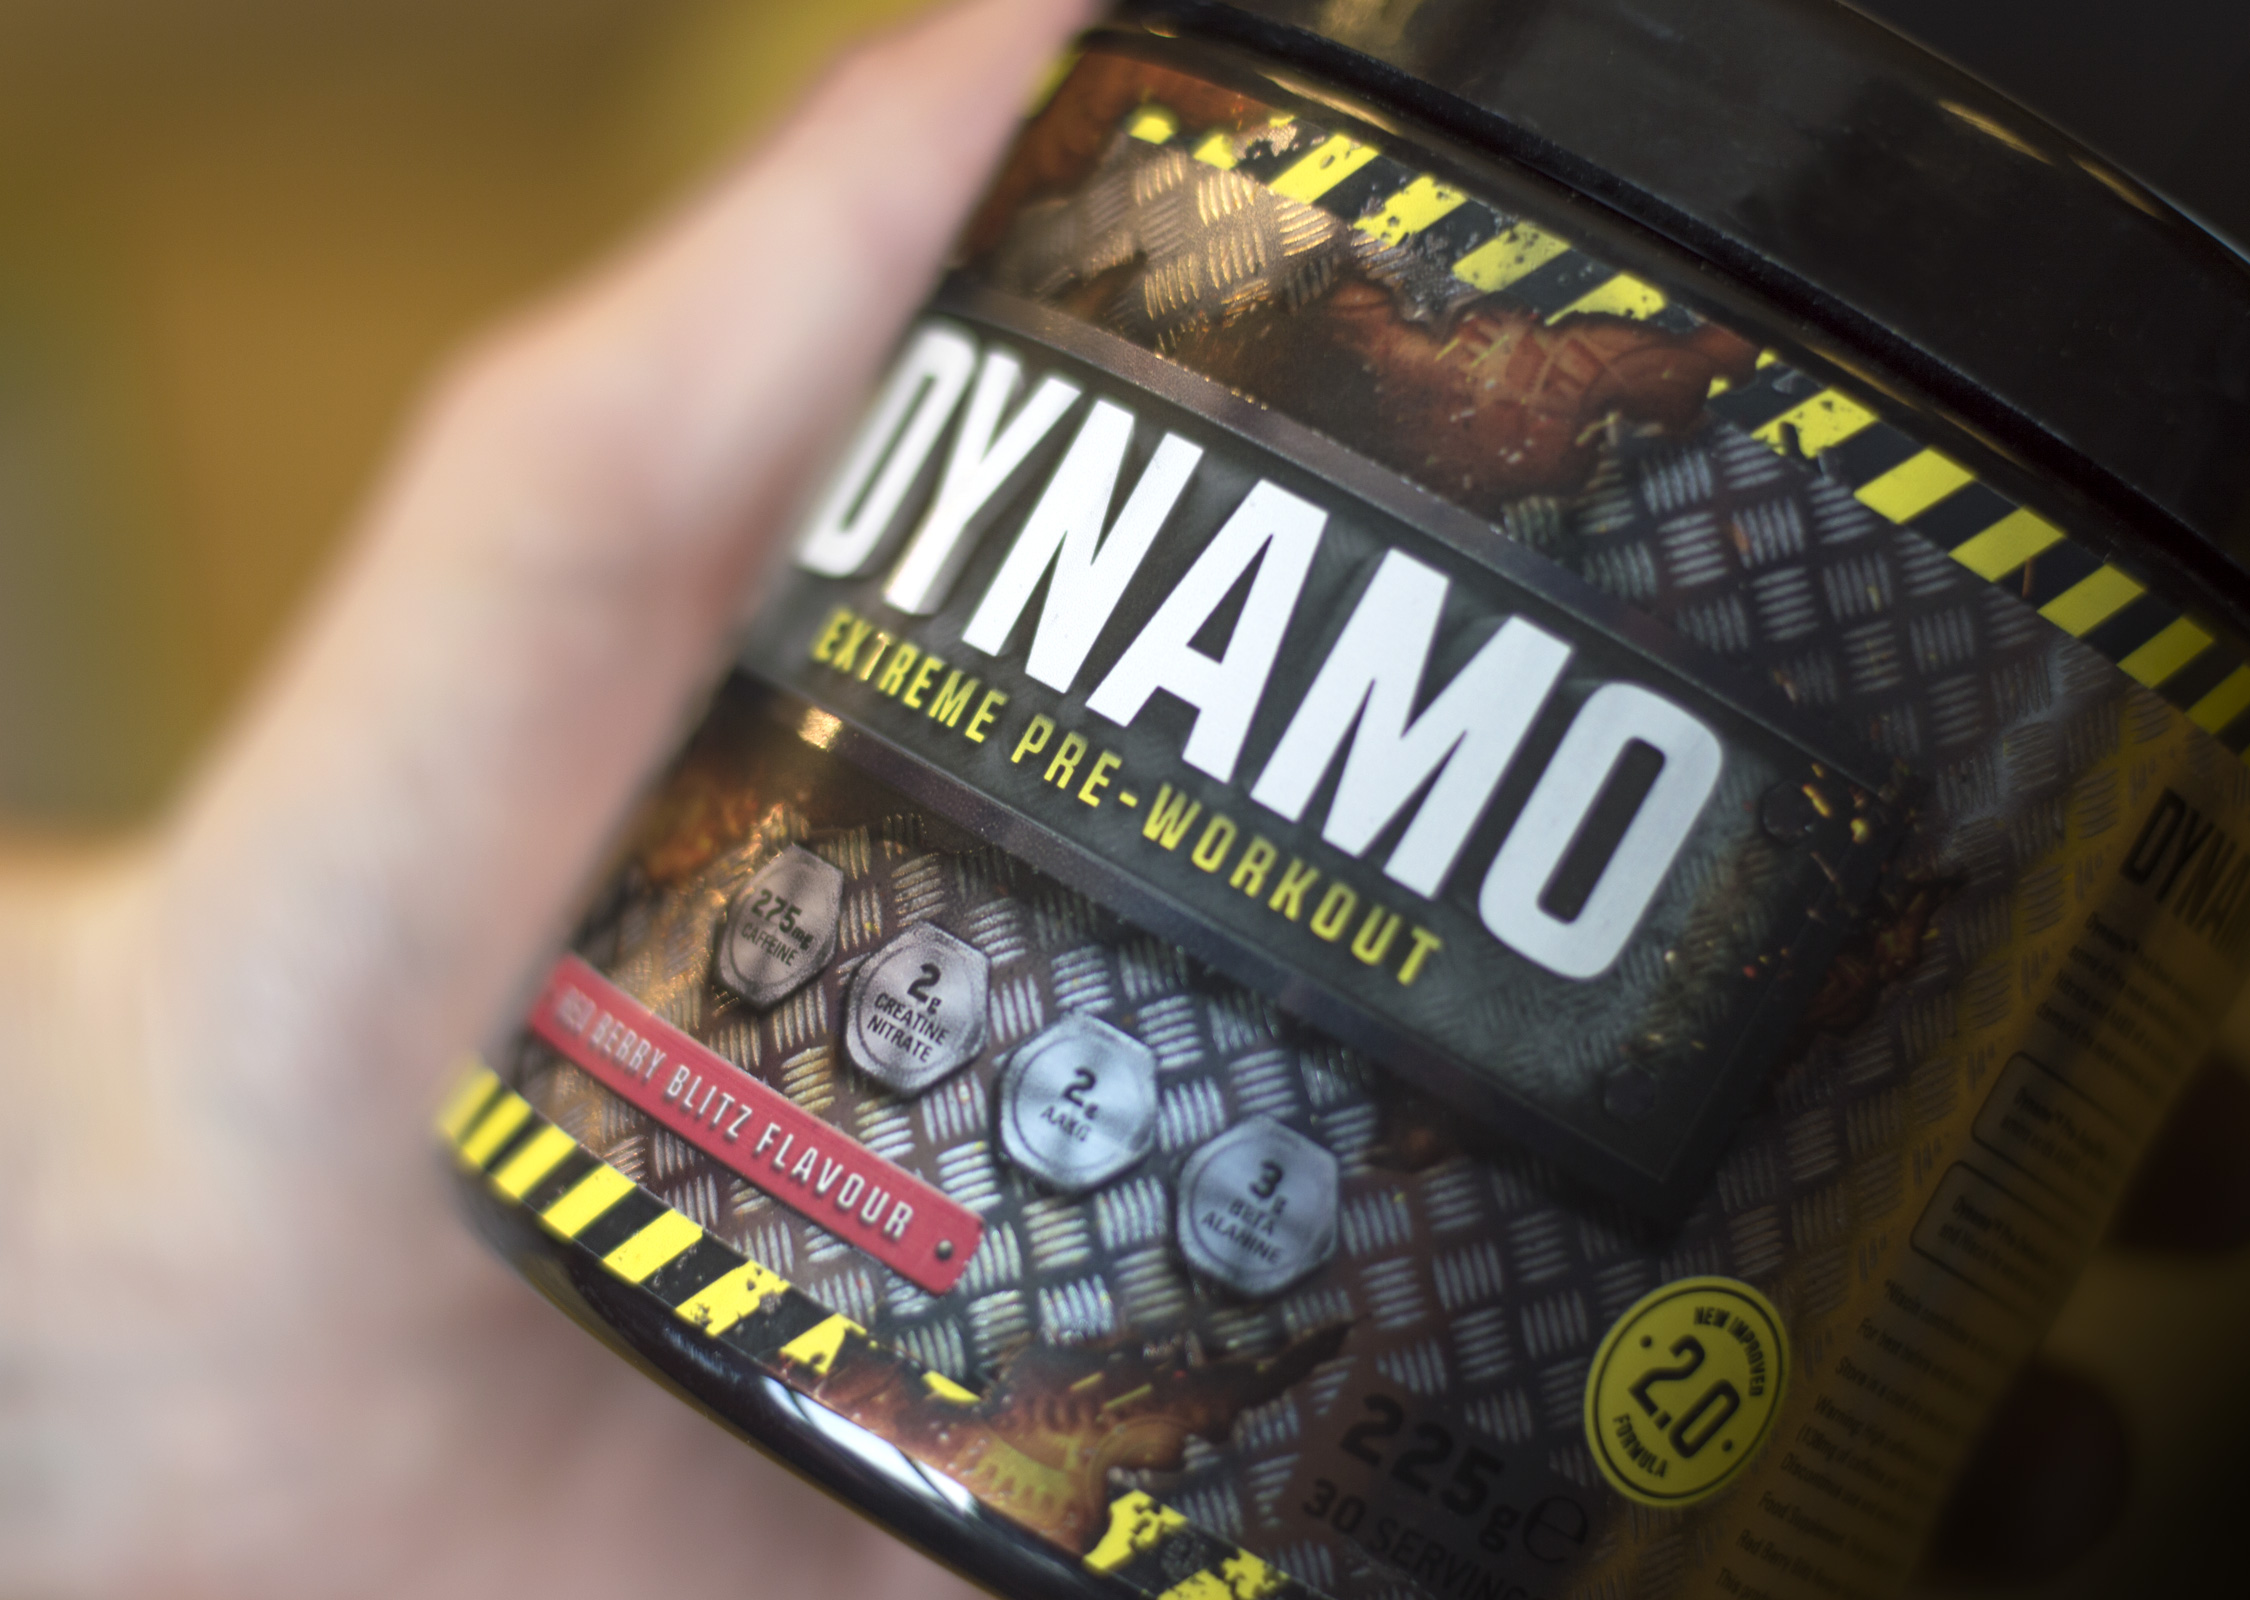 New labelling for Protein Dynamix (Dynamo)